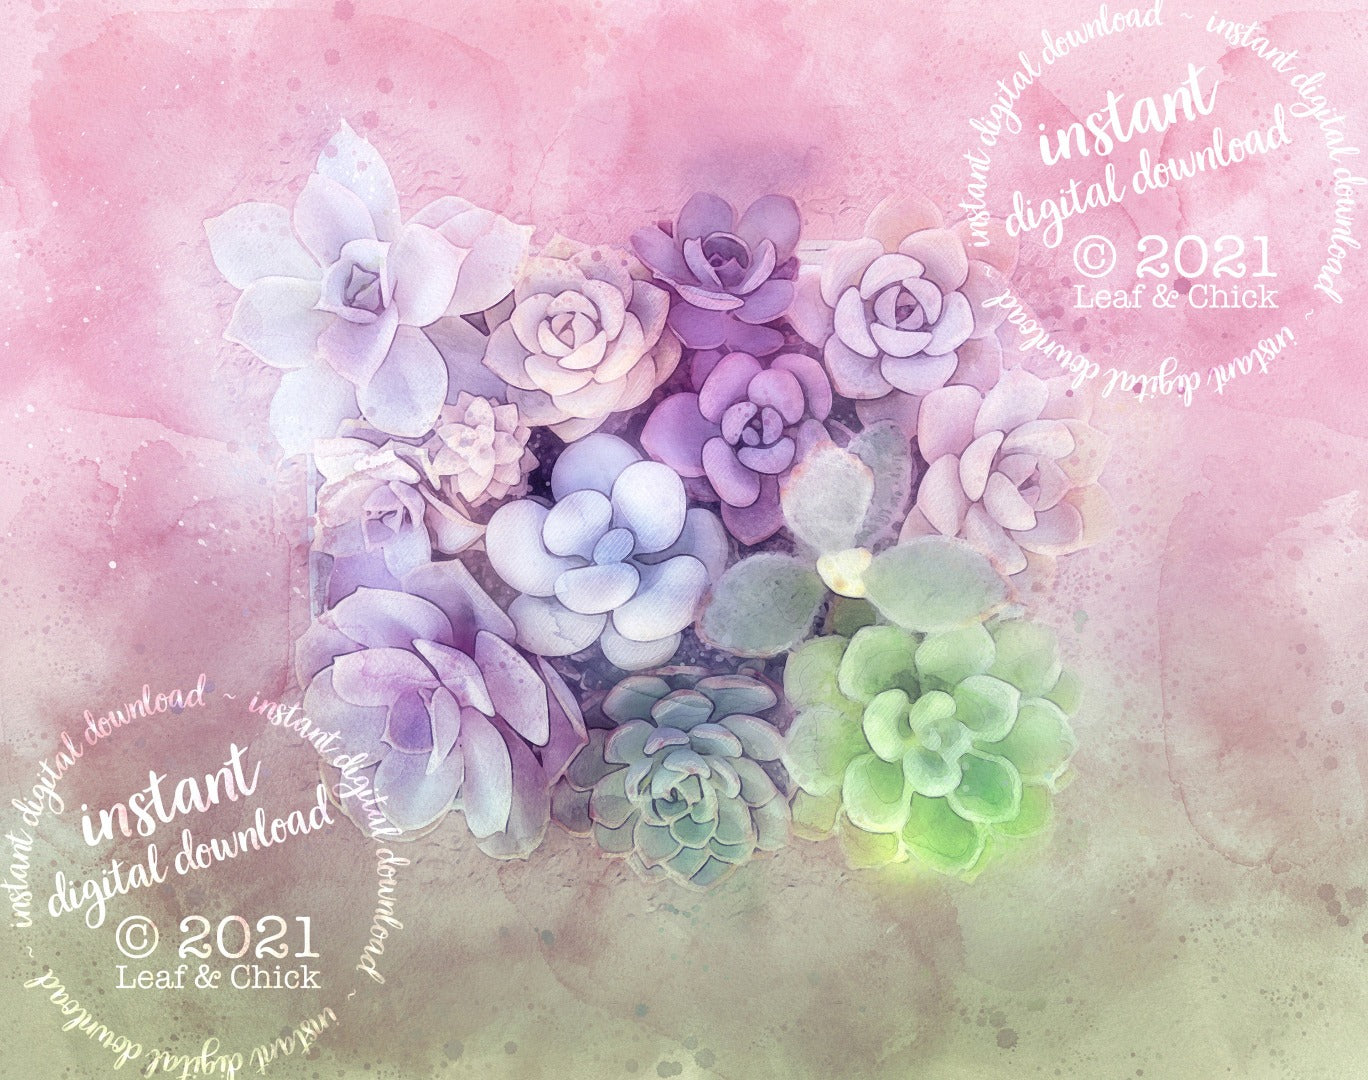 beautiful succulent art in shades of pinks, purples and greens